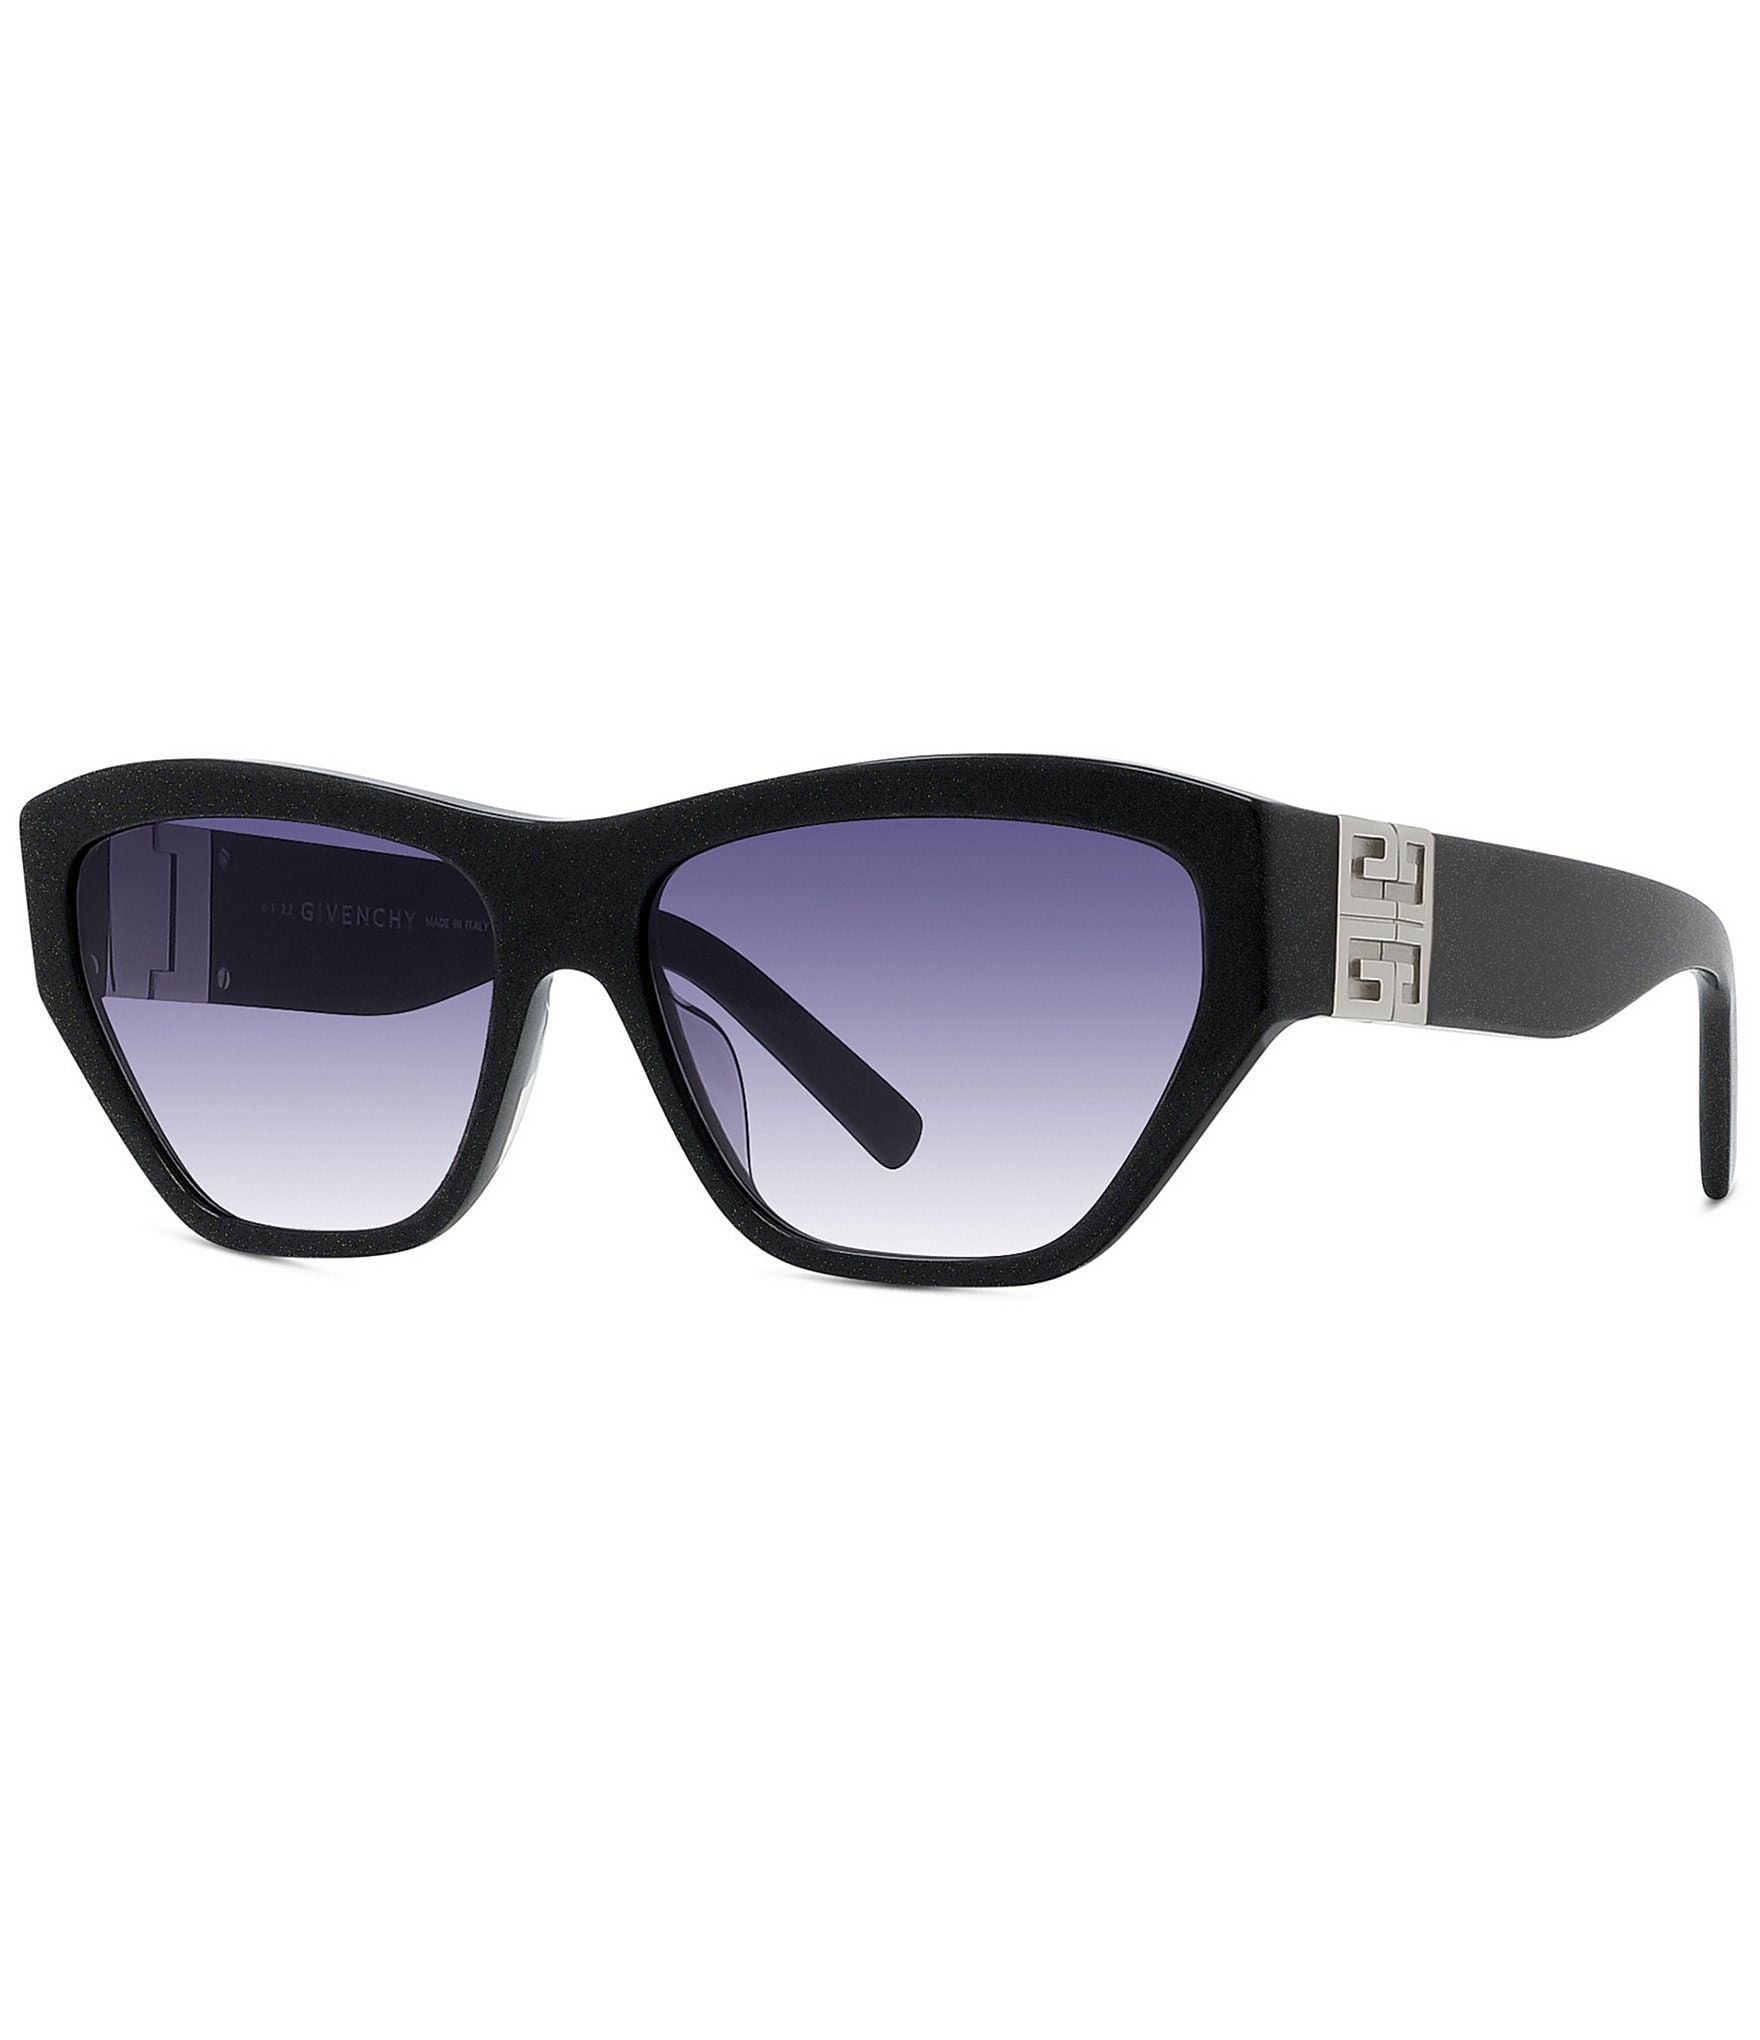 Black 4G rounded acetate sunglasses, Givenchy